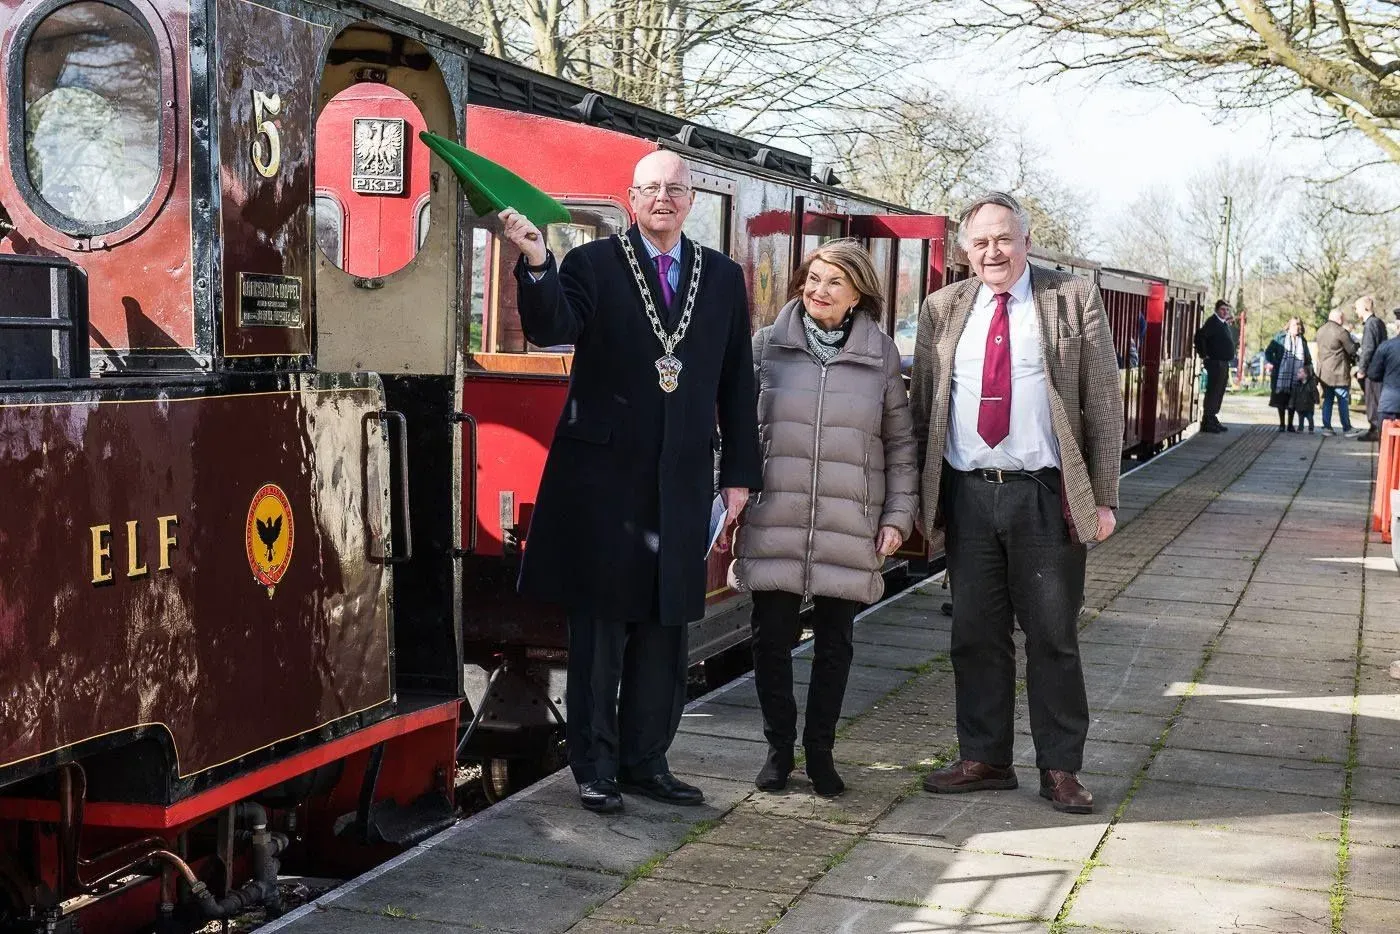 Traditionally, the mayor of Leighton Linslade will flag the first train of the season off, like he's doing here.